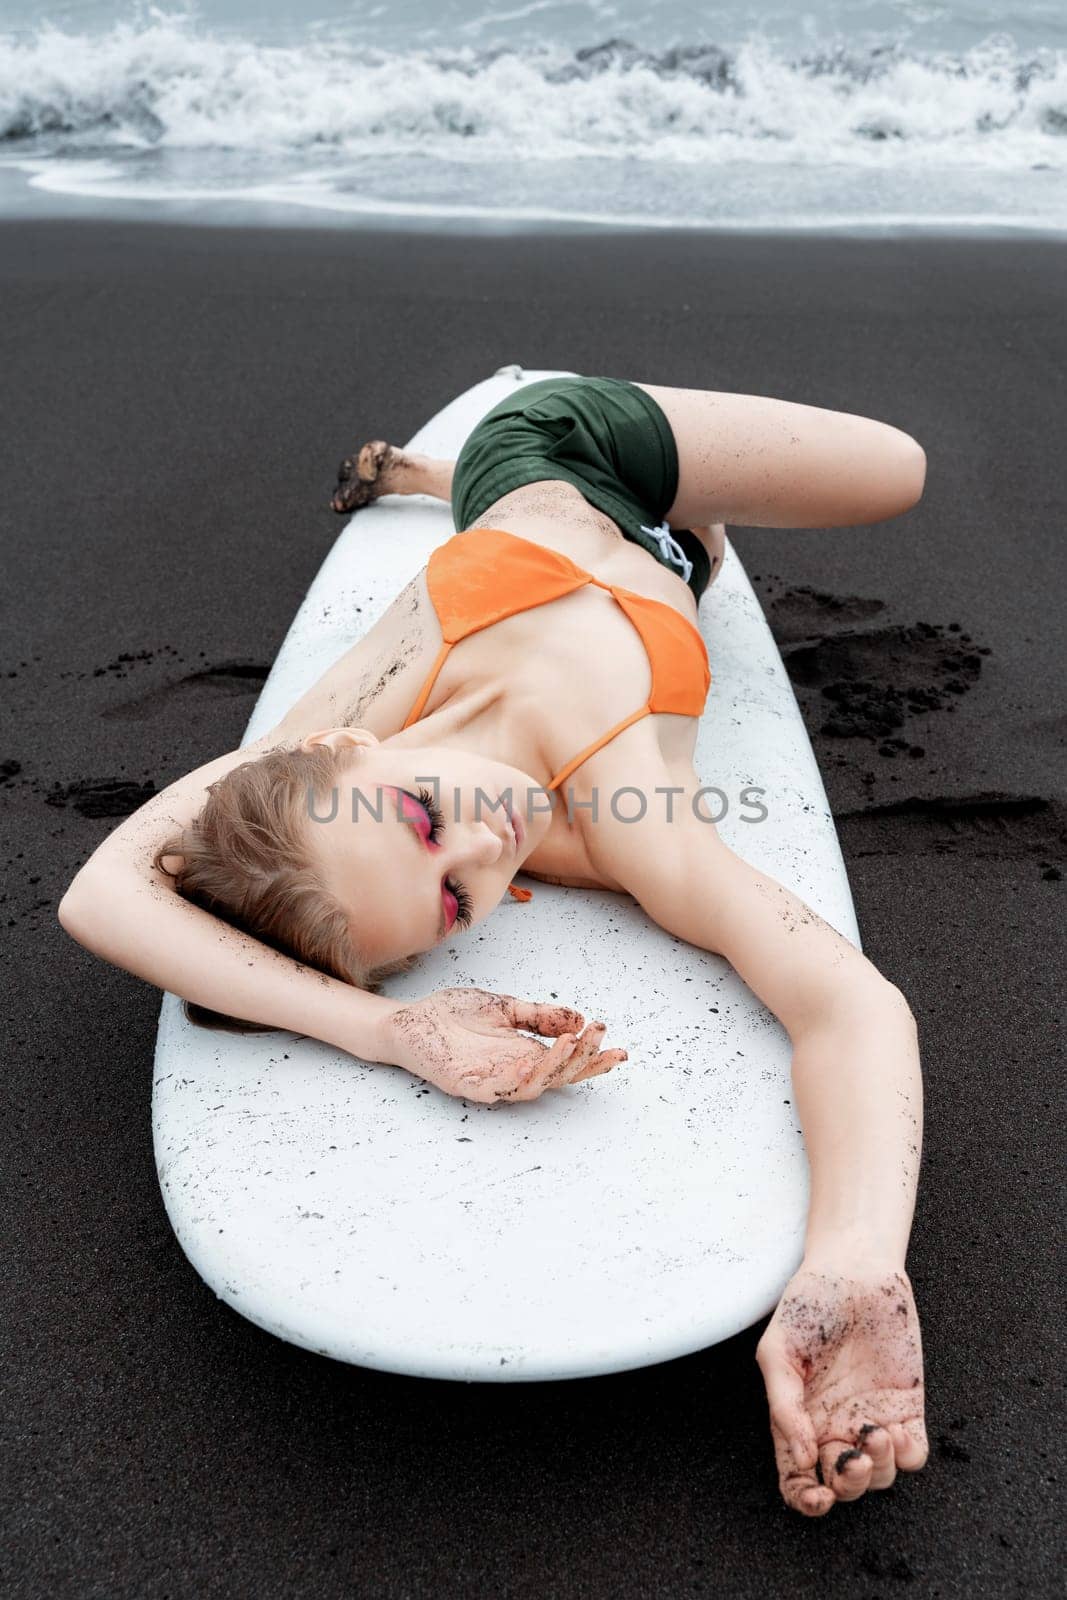 Female surfer is enjoying well deserved break on black sandy beach, lying on white surfboard with eyes closed. Sensuality sports fashion model looks so relaxed after an intense sports training session